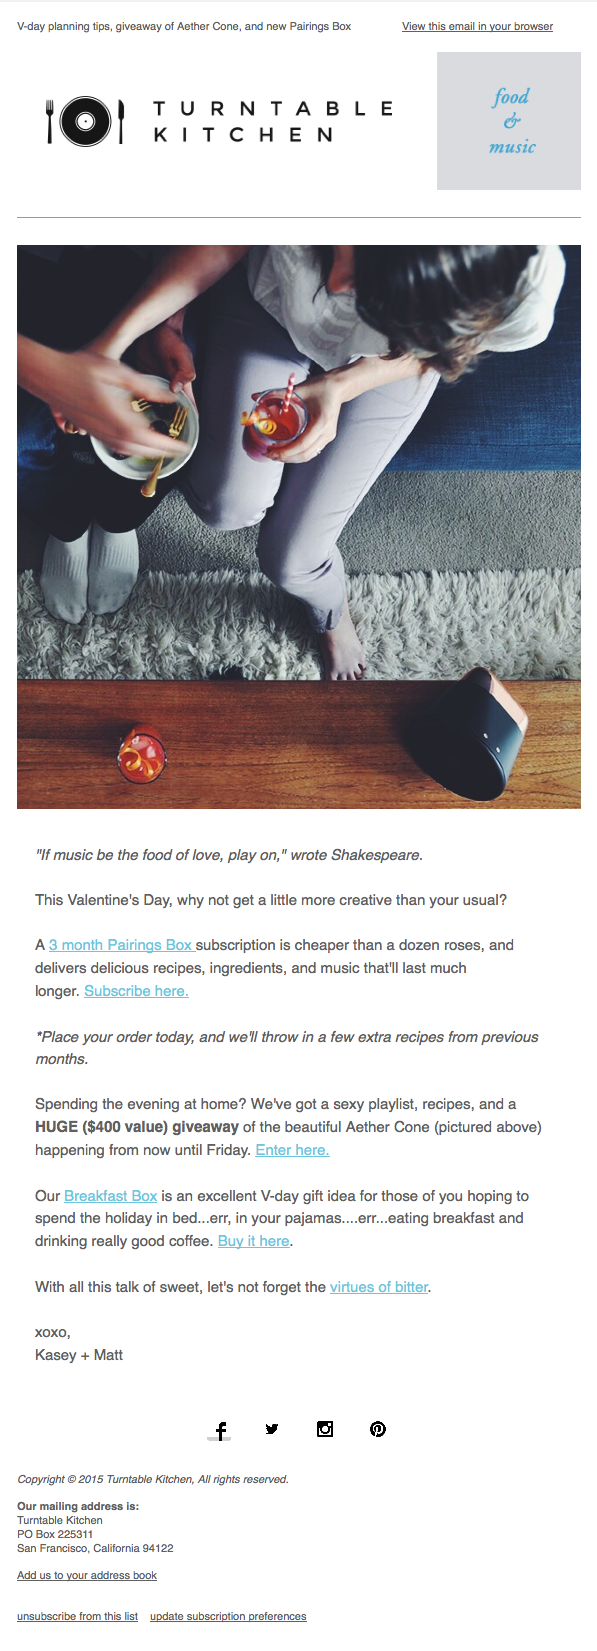 Emails We Love, Just in Time for Valentine